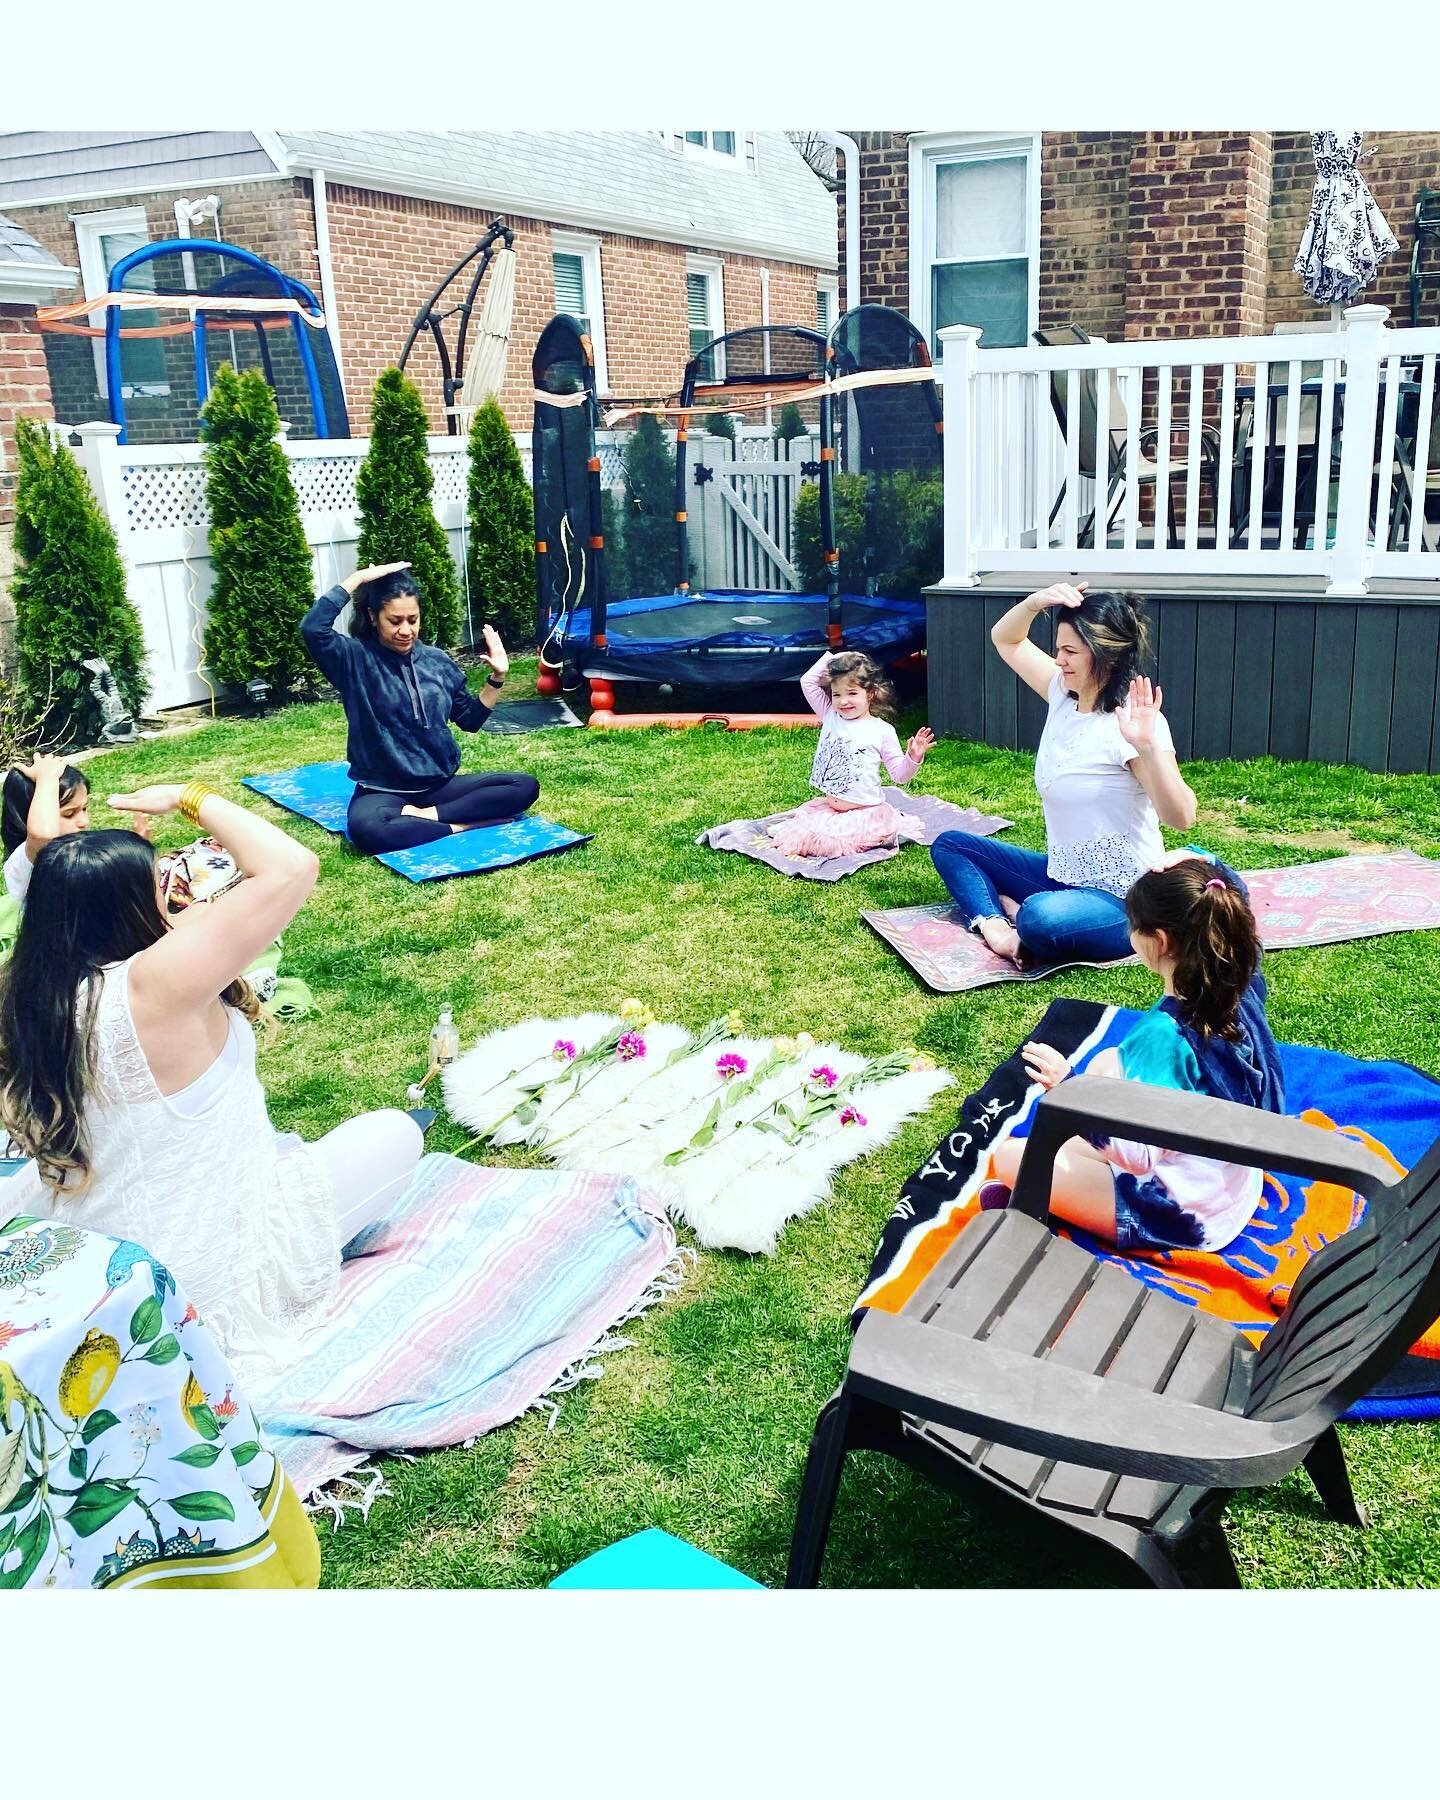 Backyard Goddess Circle💫

This sacred ritual allows women to bond on another level &amp; empower eachother.✨

In this beautiful ceremony we used breathwork + meditation to let go of anything that no longer served us-
creating space for new intention